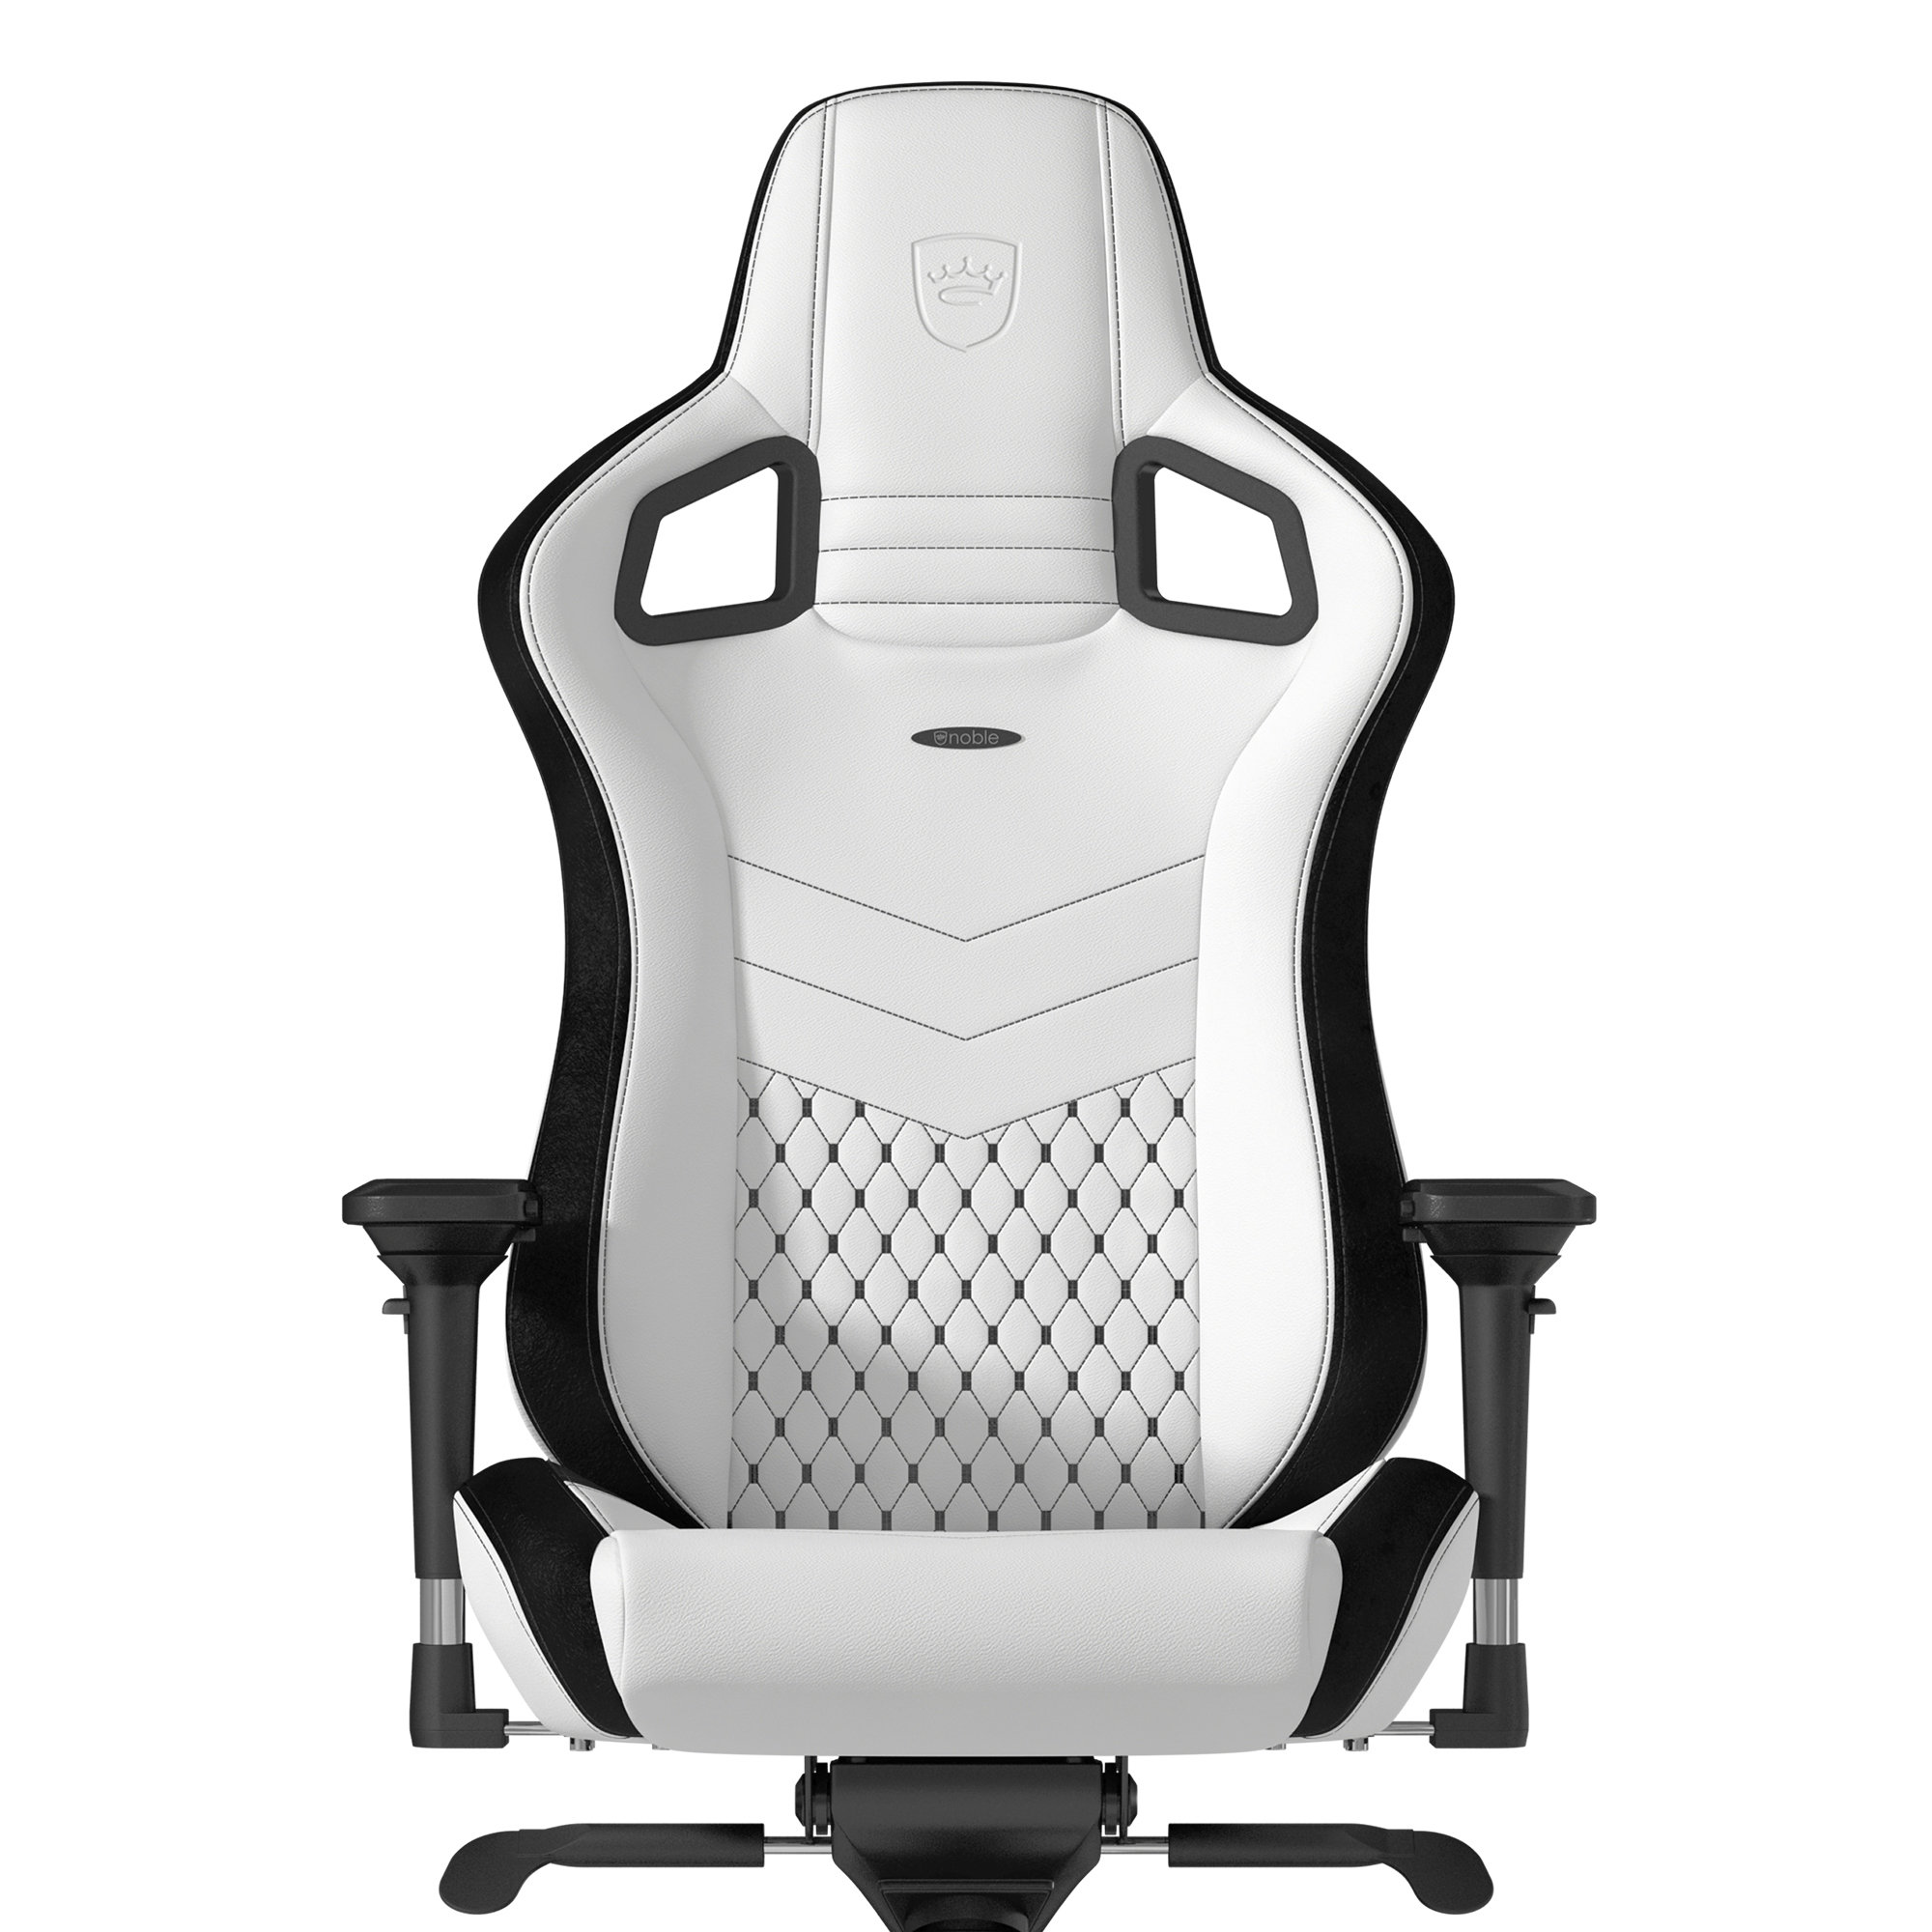 noblechairs - noblechairs EPIC Gaming Chair - White/Black